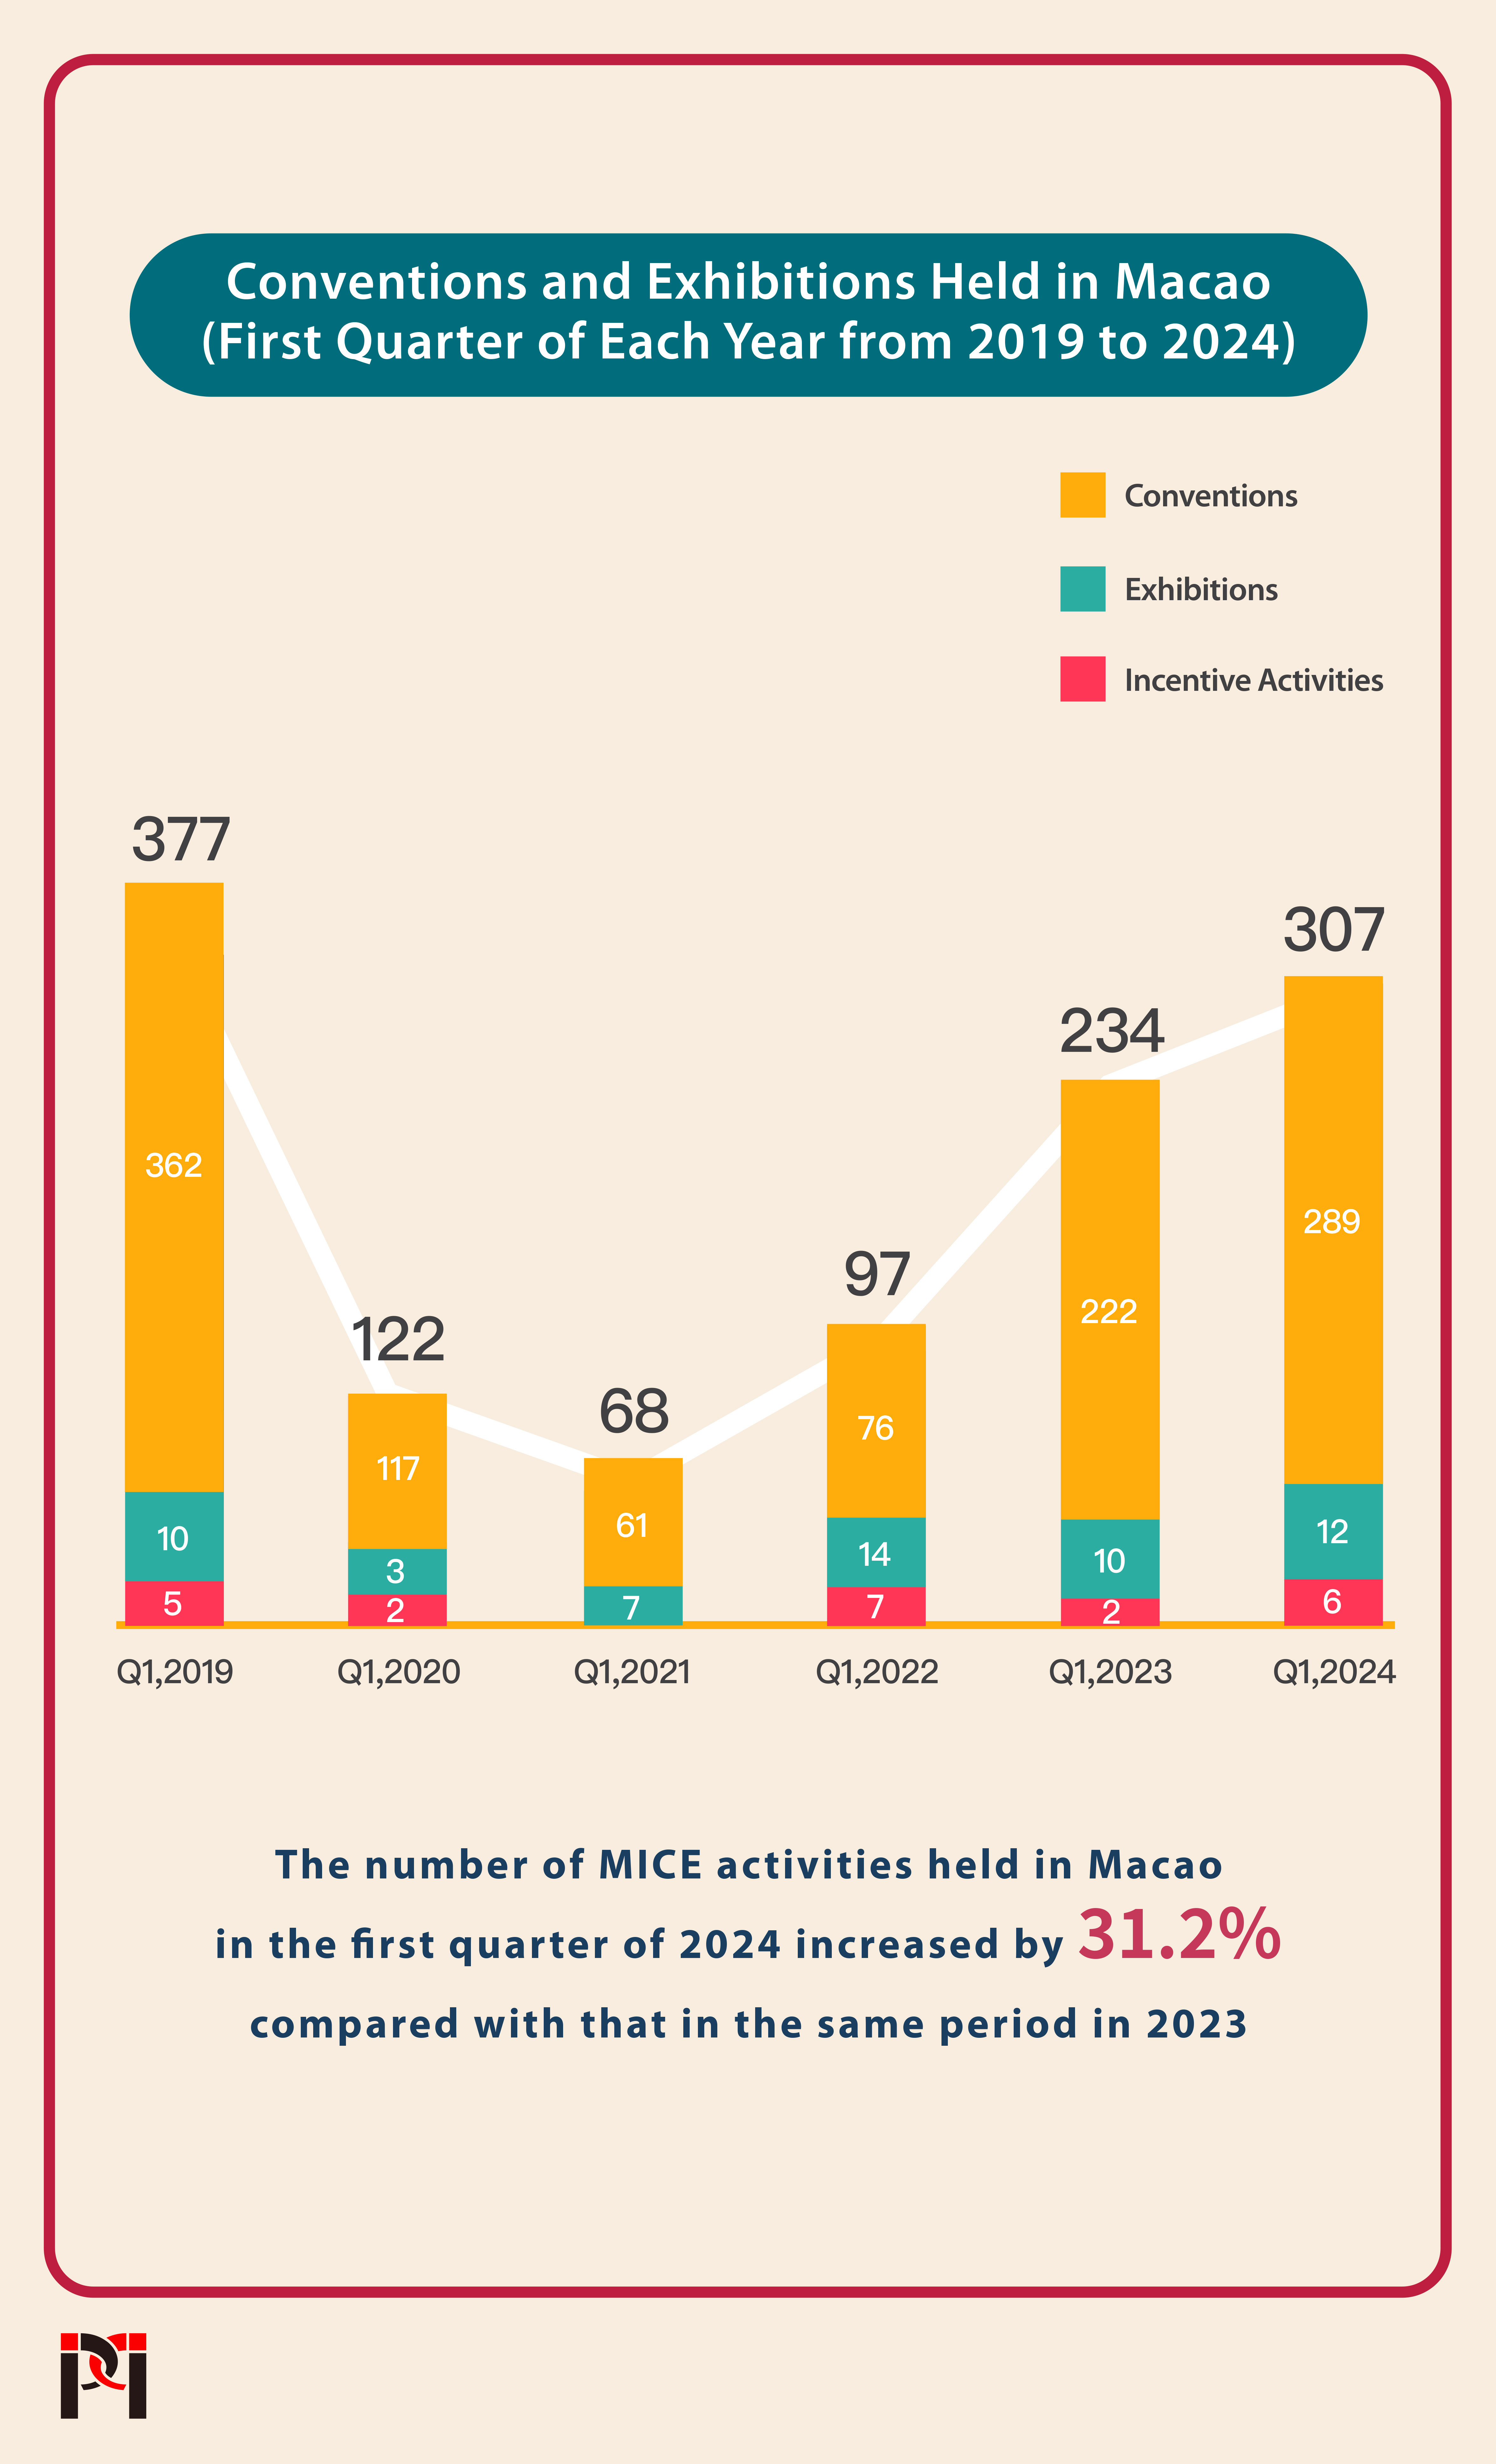 The number of conventions and exhibitions (307) held in Macao in the first quarter of 2024 increased by 31.2% compared with that (234) in the same period in 2023